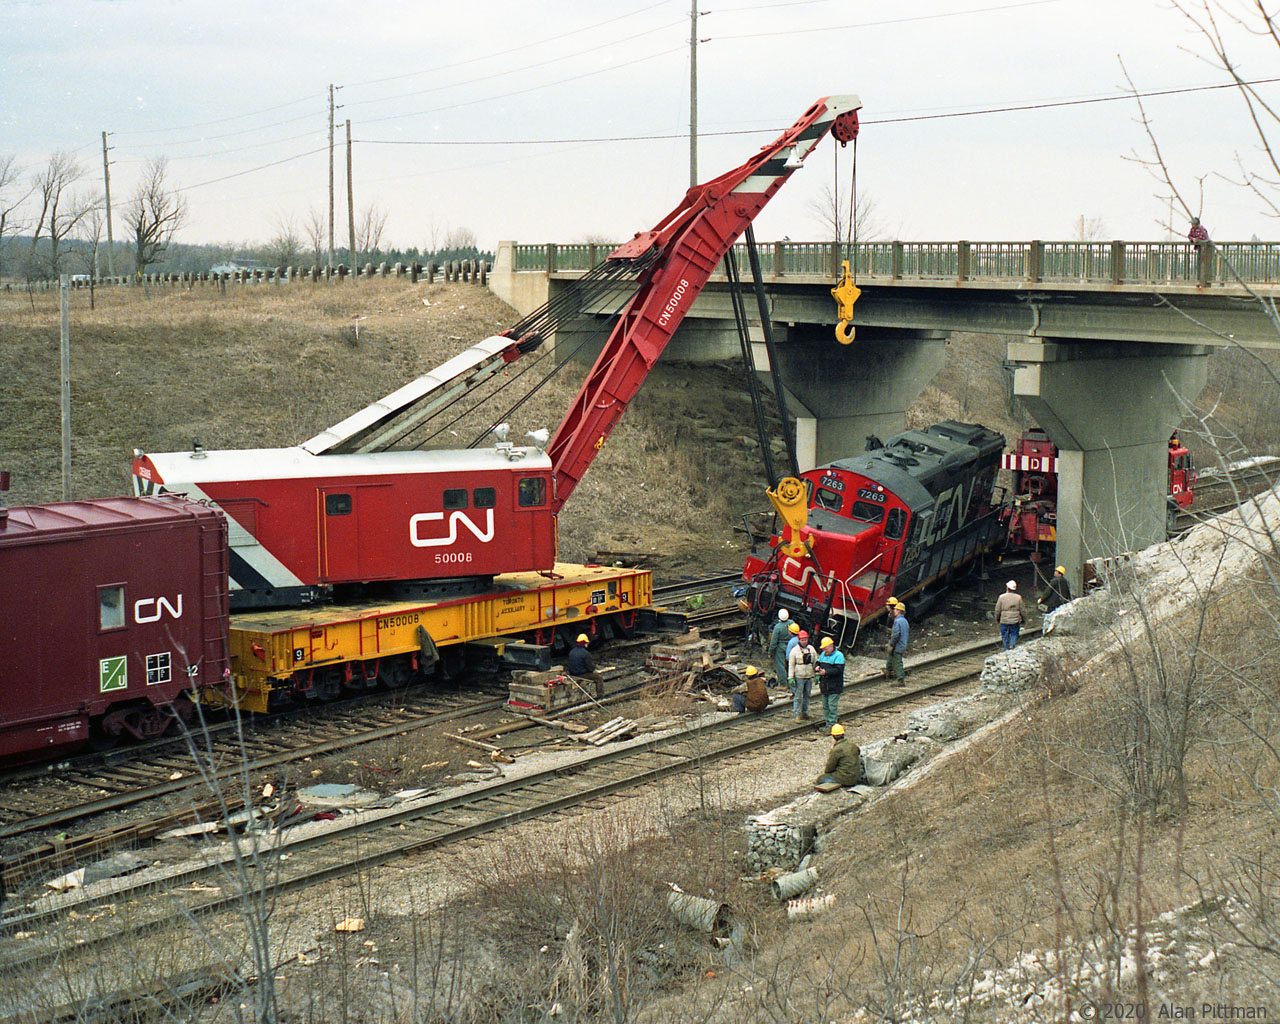 GP9rm mother unit CN 7263 will have its front lifted by Toronto Auxiliary crane CN 50008 to get it back on the rails. The paint on CN 7263 is clean and glossy, so it's not long since its 1990 remanufacture.
CN 7263 had been in a collision with GP38-2 hump switching unit CN 7508 which appeared to have got the worst of it, including having all its right side hood access doors torn off. Both units returned to service after repairs.
According to my 1990 Trackside Guide, CN 50008 was a 250 ton capacity Bucyrus-Erie built in 1946. 
Note the outriggers extended from the crane base and woodblock piles beneath to counter tipping forces.
The bridge carries Rutherford Road over Macmillan Yard hump pullback tracks.
Alan recalls taking these pictures in 1991. Foliage colour and some residual snow suggest March.